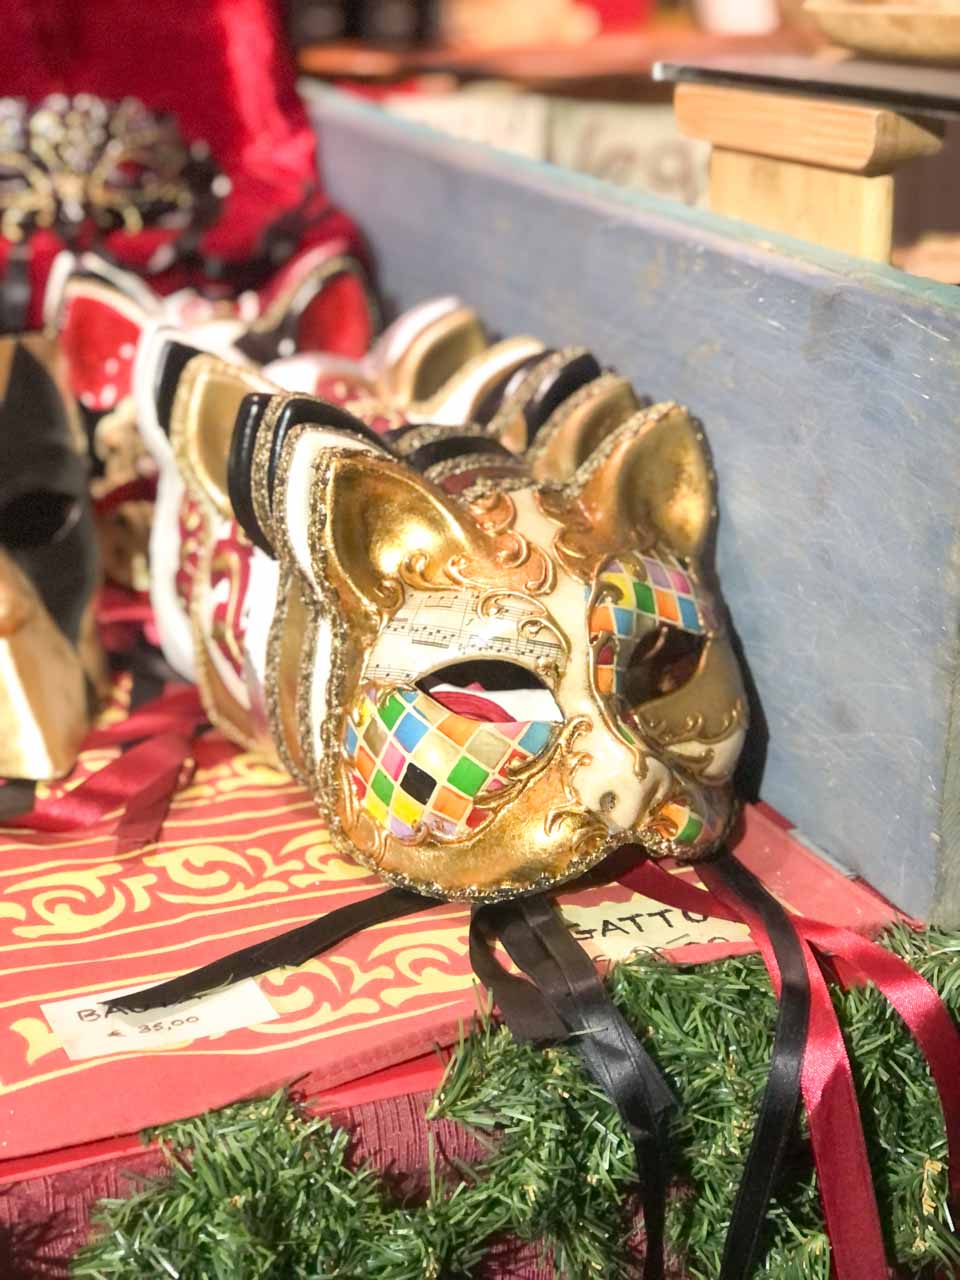 Elegant Venetian masks with intricate gold designs on display at the Sister Cities Market in Nuremberg